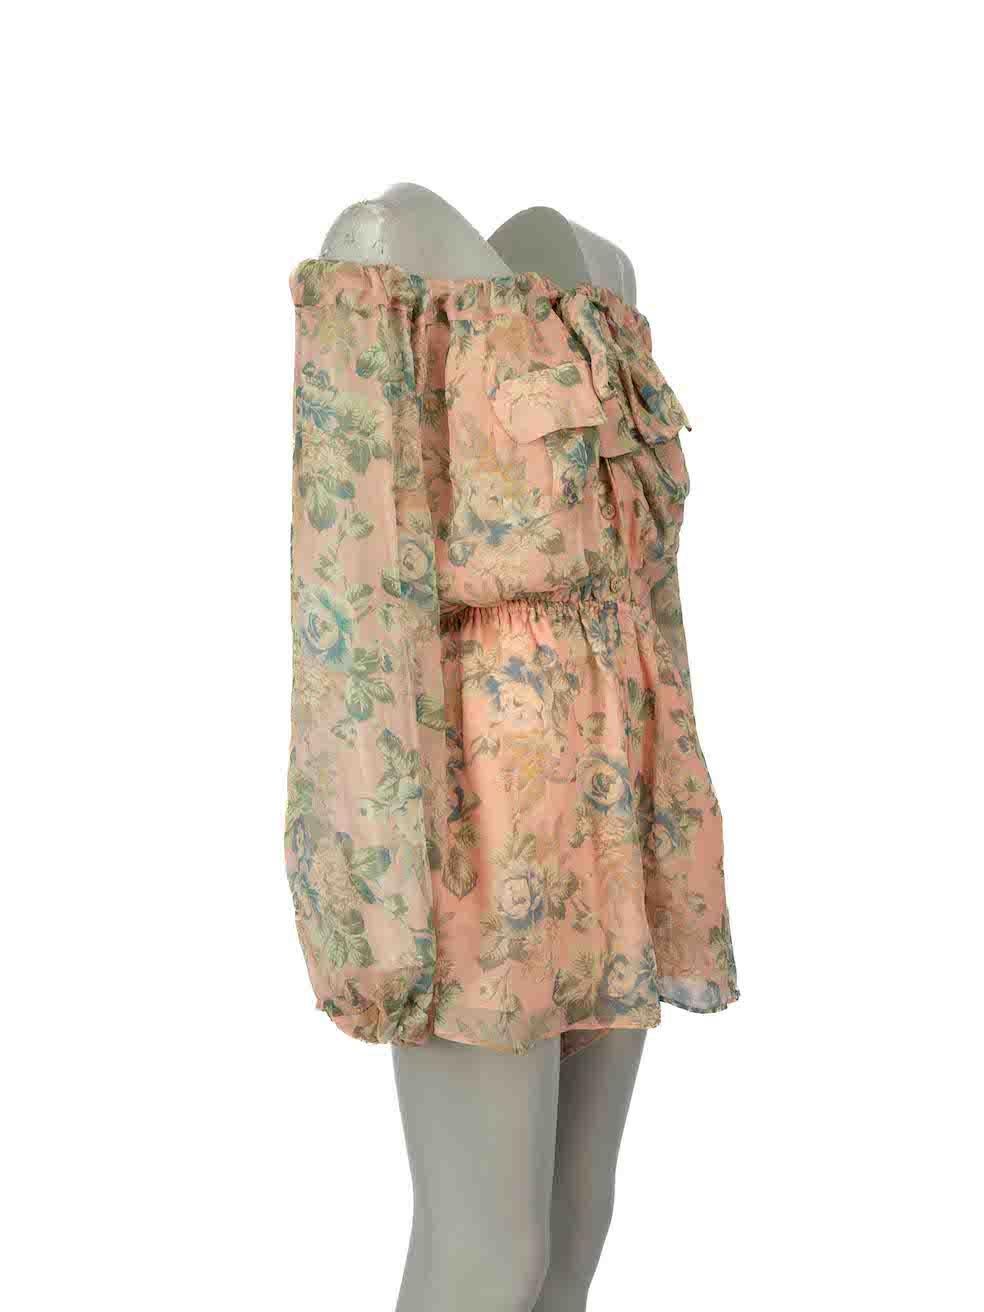 CONDITION is Very good. Hardly any visible wear to playsuit is evident on this used Zimmermann designer resale item.
  
Details
Pink
Silk
Playsuit
Elasticated off-the-shoulder
Floral pattern
Long sleeves
Elasticated cuffs and waist
Button up